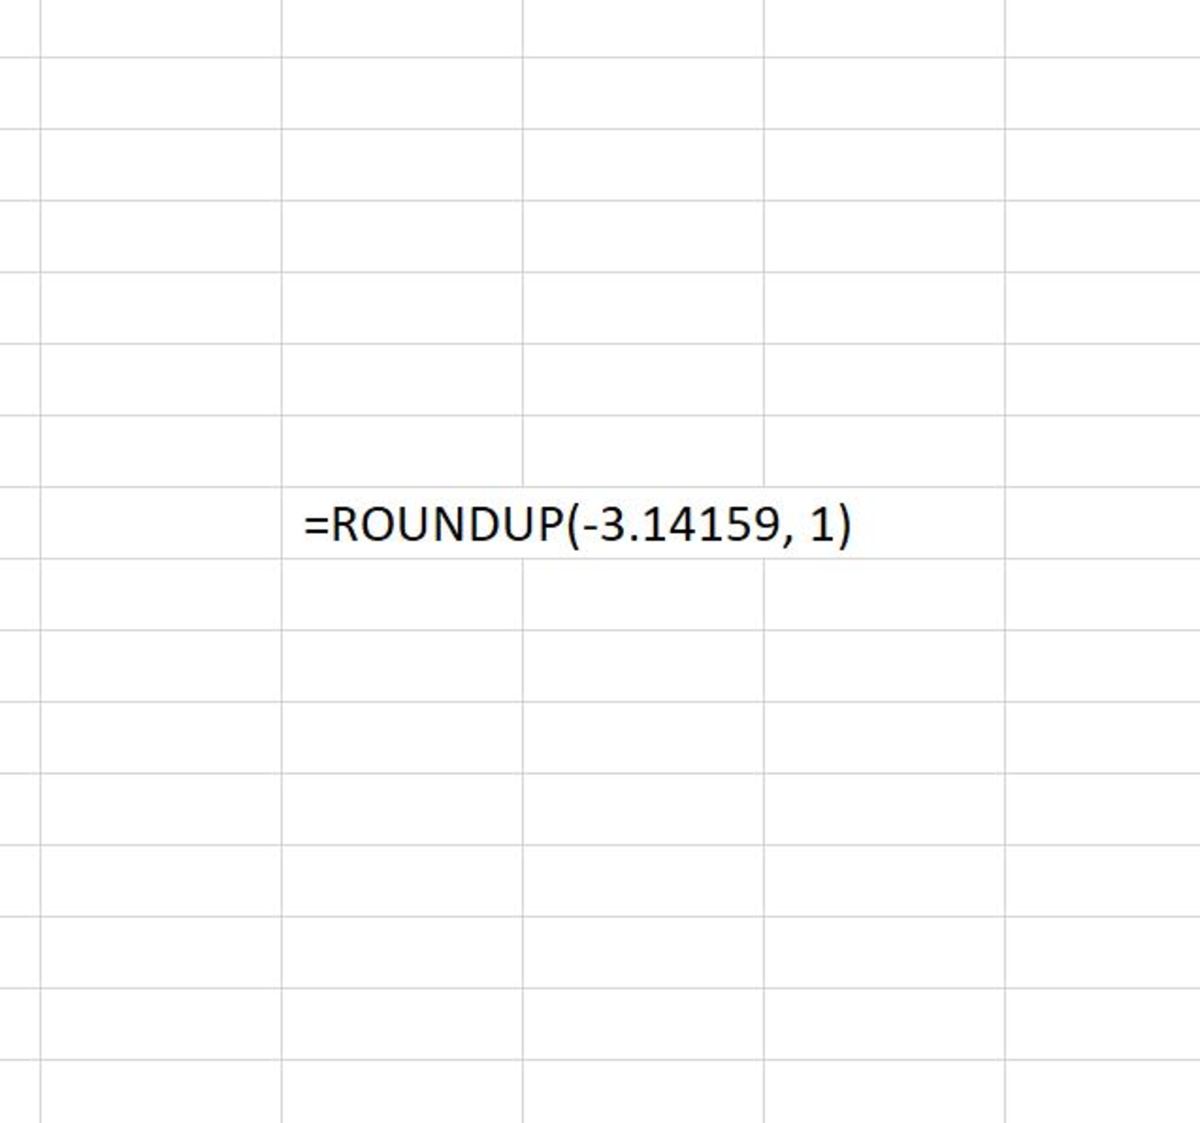 Here in the illustration the ROUNDUP function is used to round up a number to one decimal place value. 